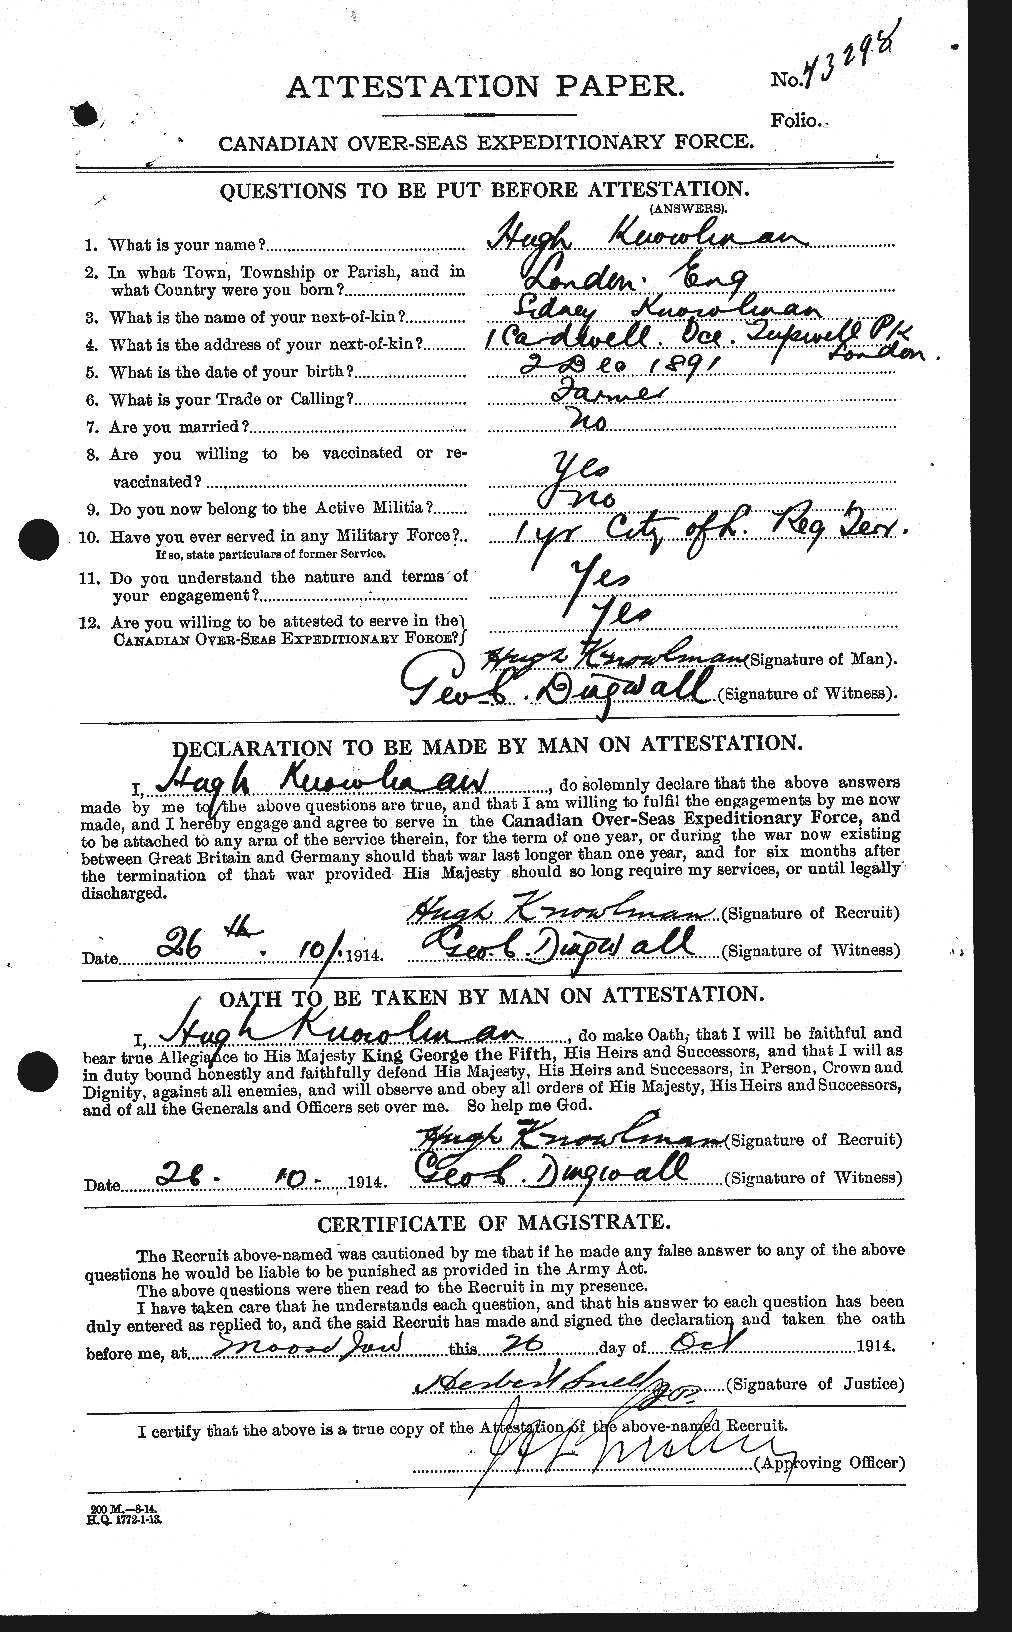 Personnel Records of the First World War - CEF 442753a